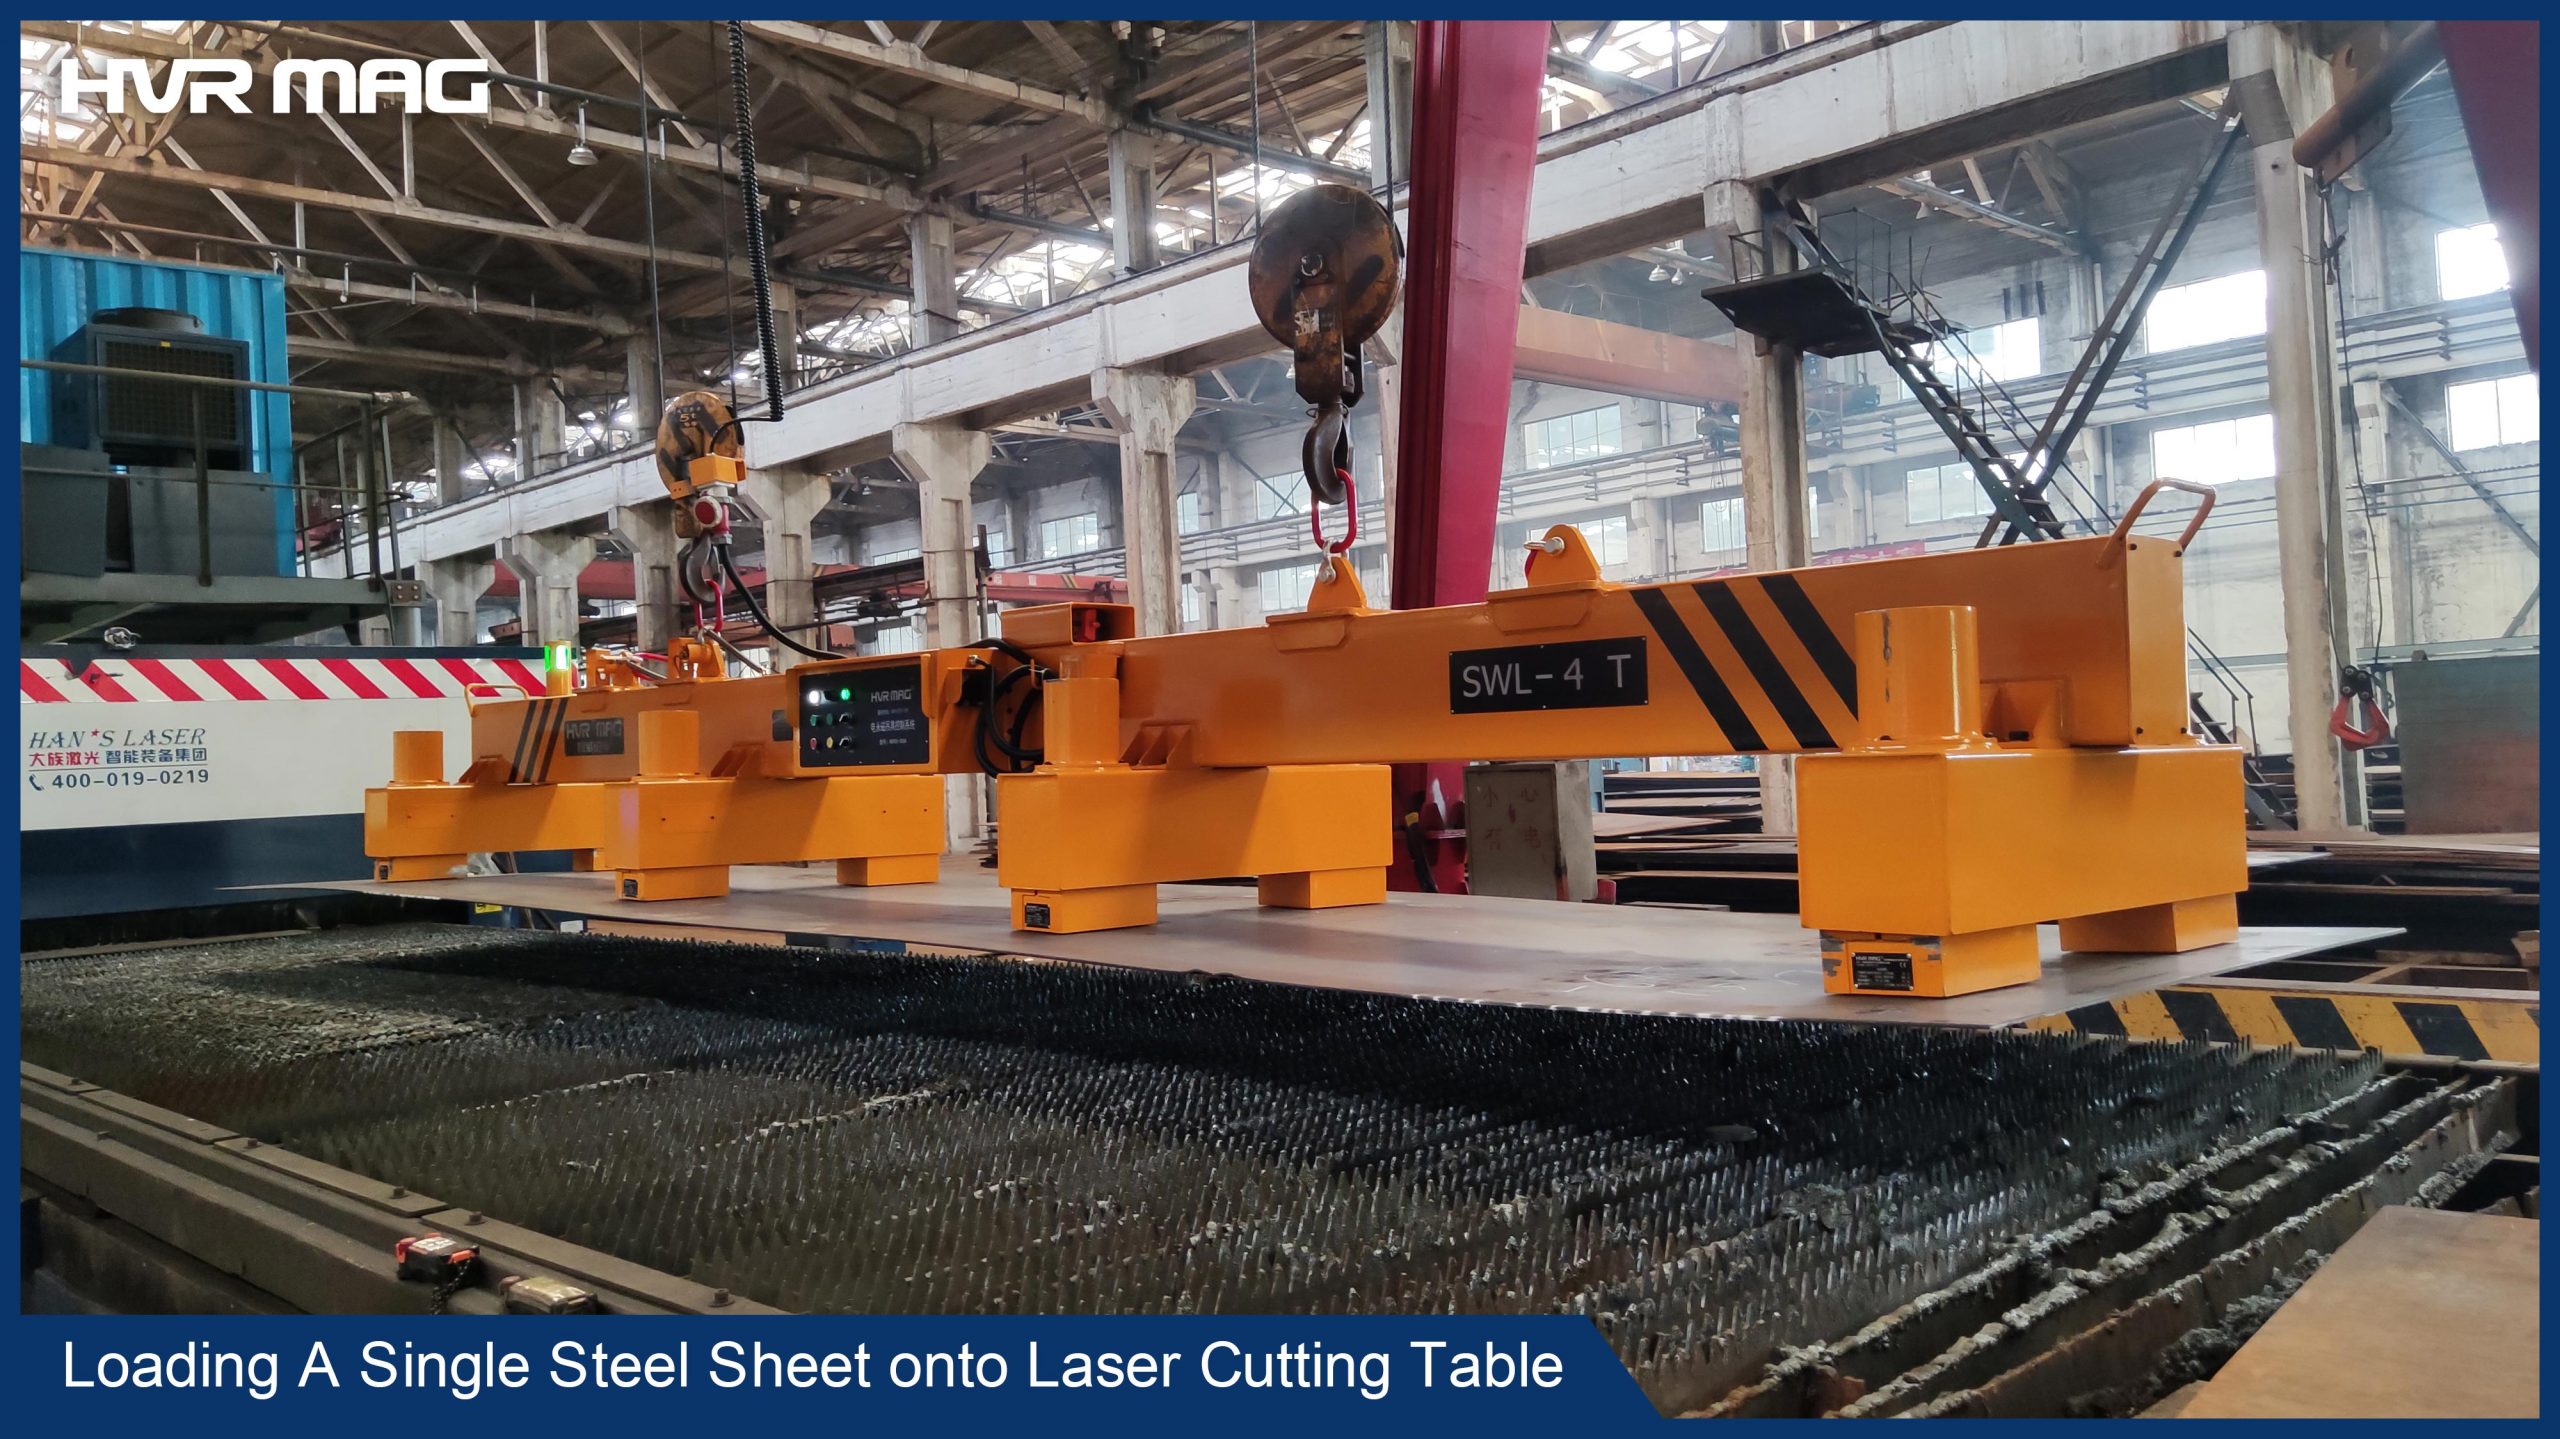 magnetic lifting beam loading steel plate for plasma cutting table - HVR MAG